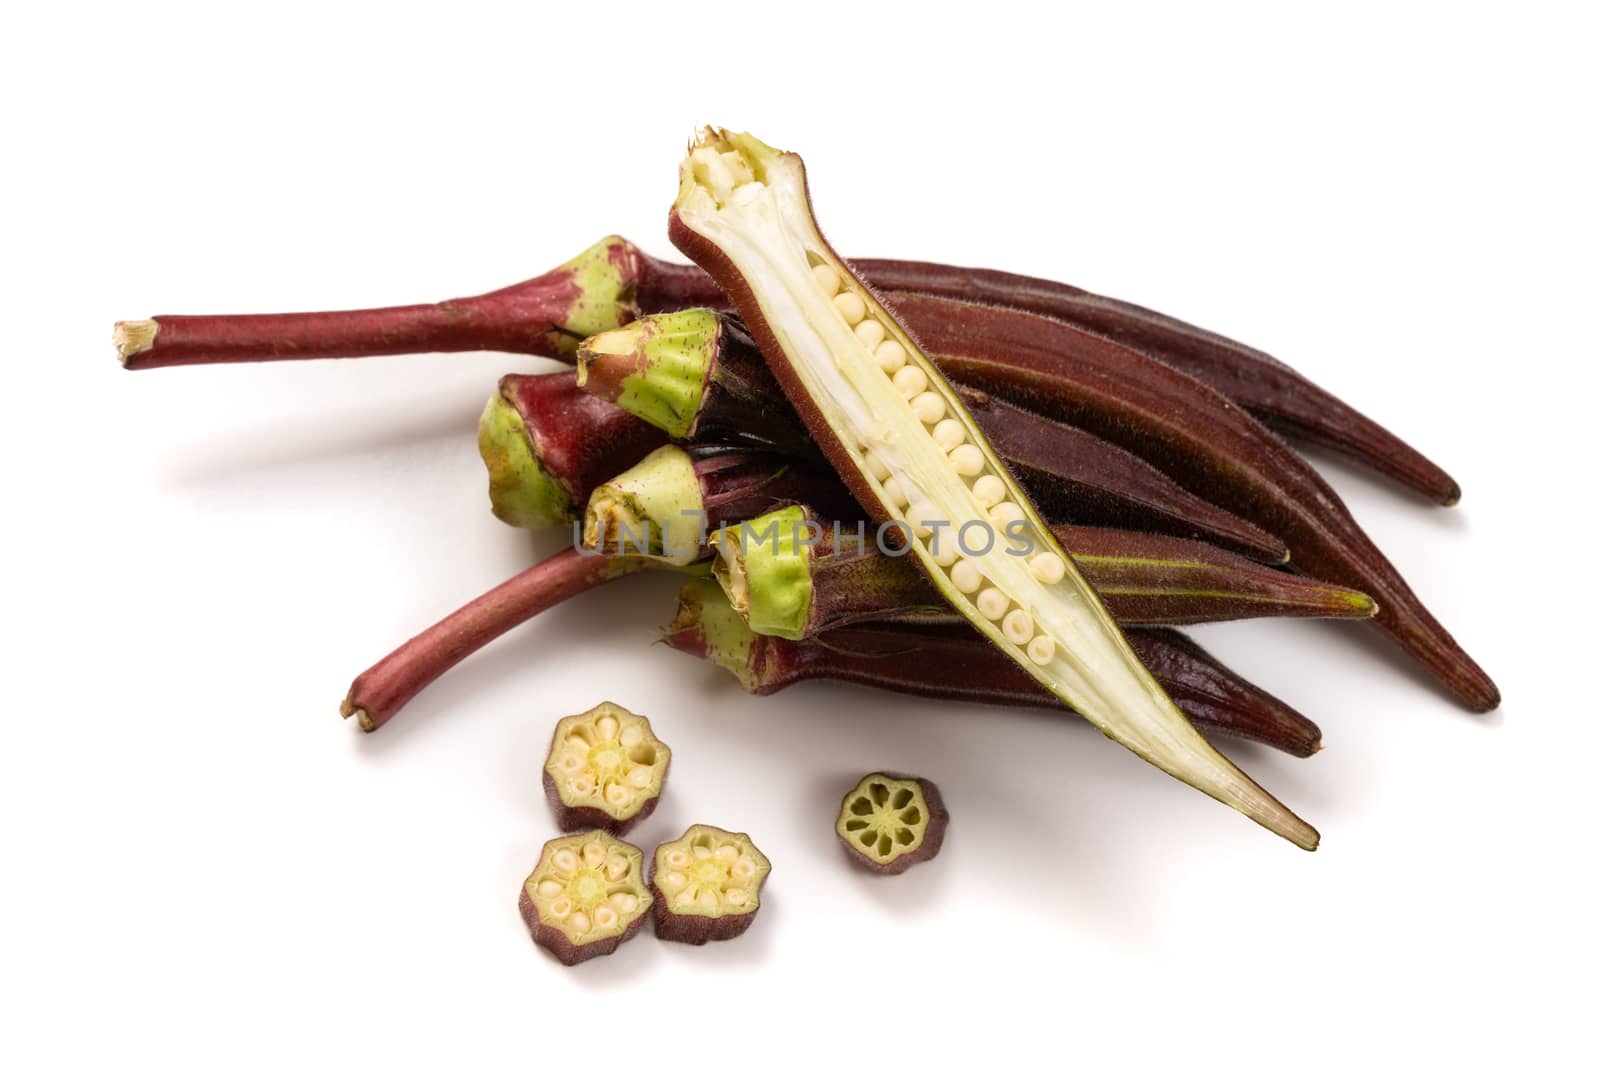 Fresh organic red okra isolated on a white background.